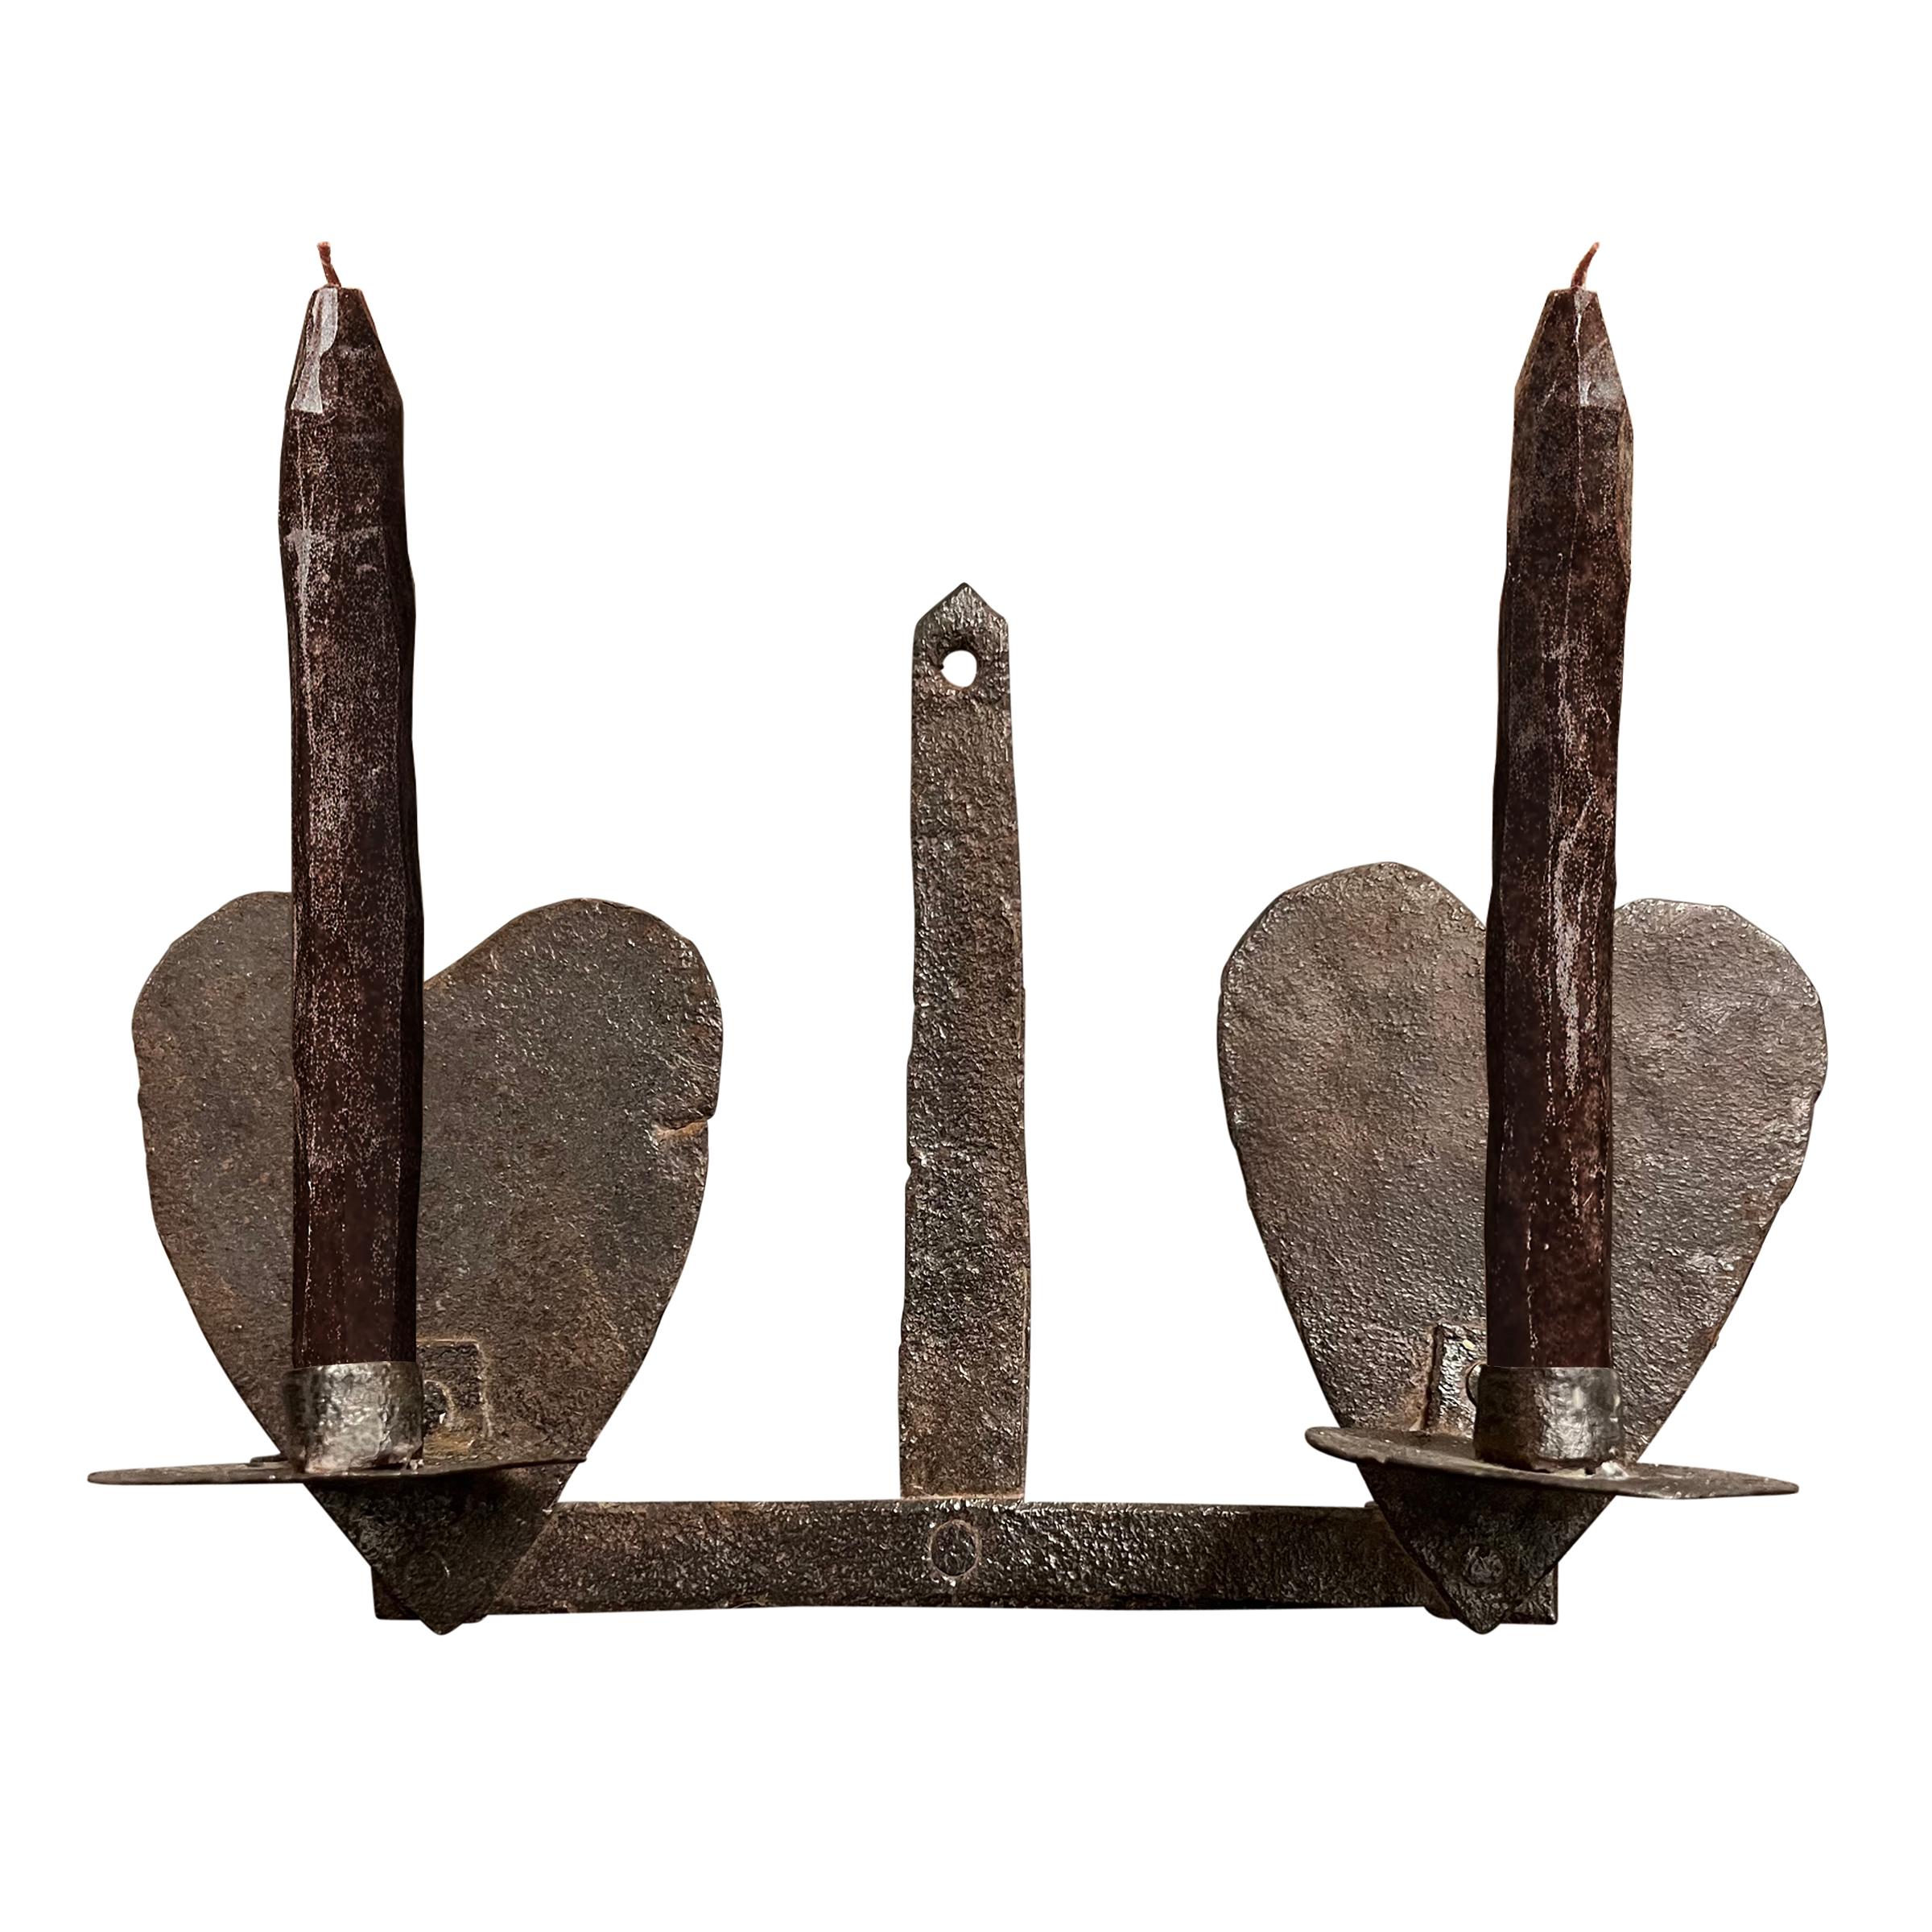 Primitive 18th Century American Candle Sconce For Sale